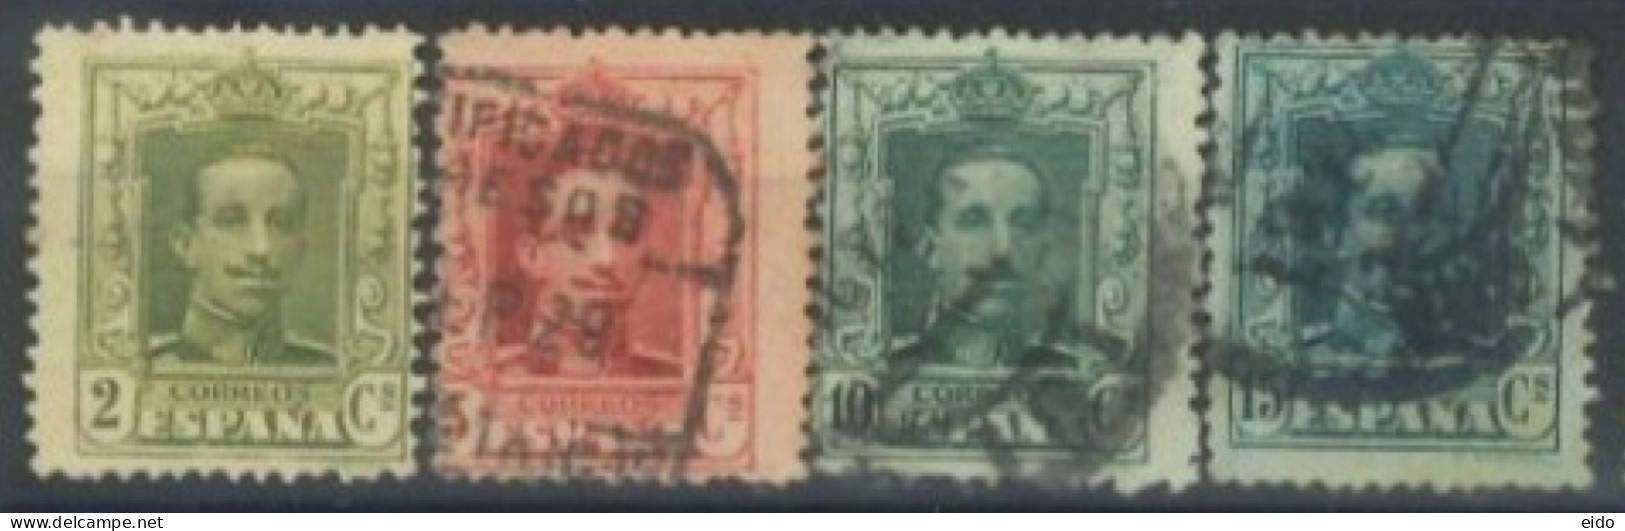 SPAIN, 1922/26, KING ALFONSO XIII STAMPS SET OF 4 # 331/32,335/36, USED. - Usati